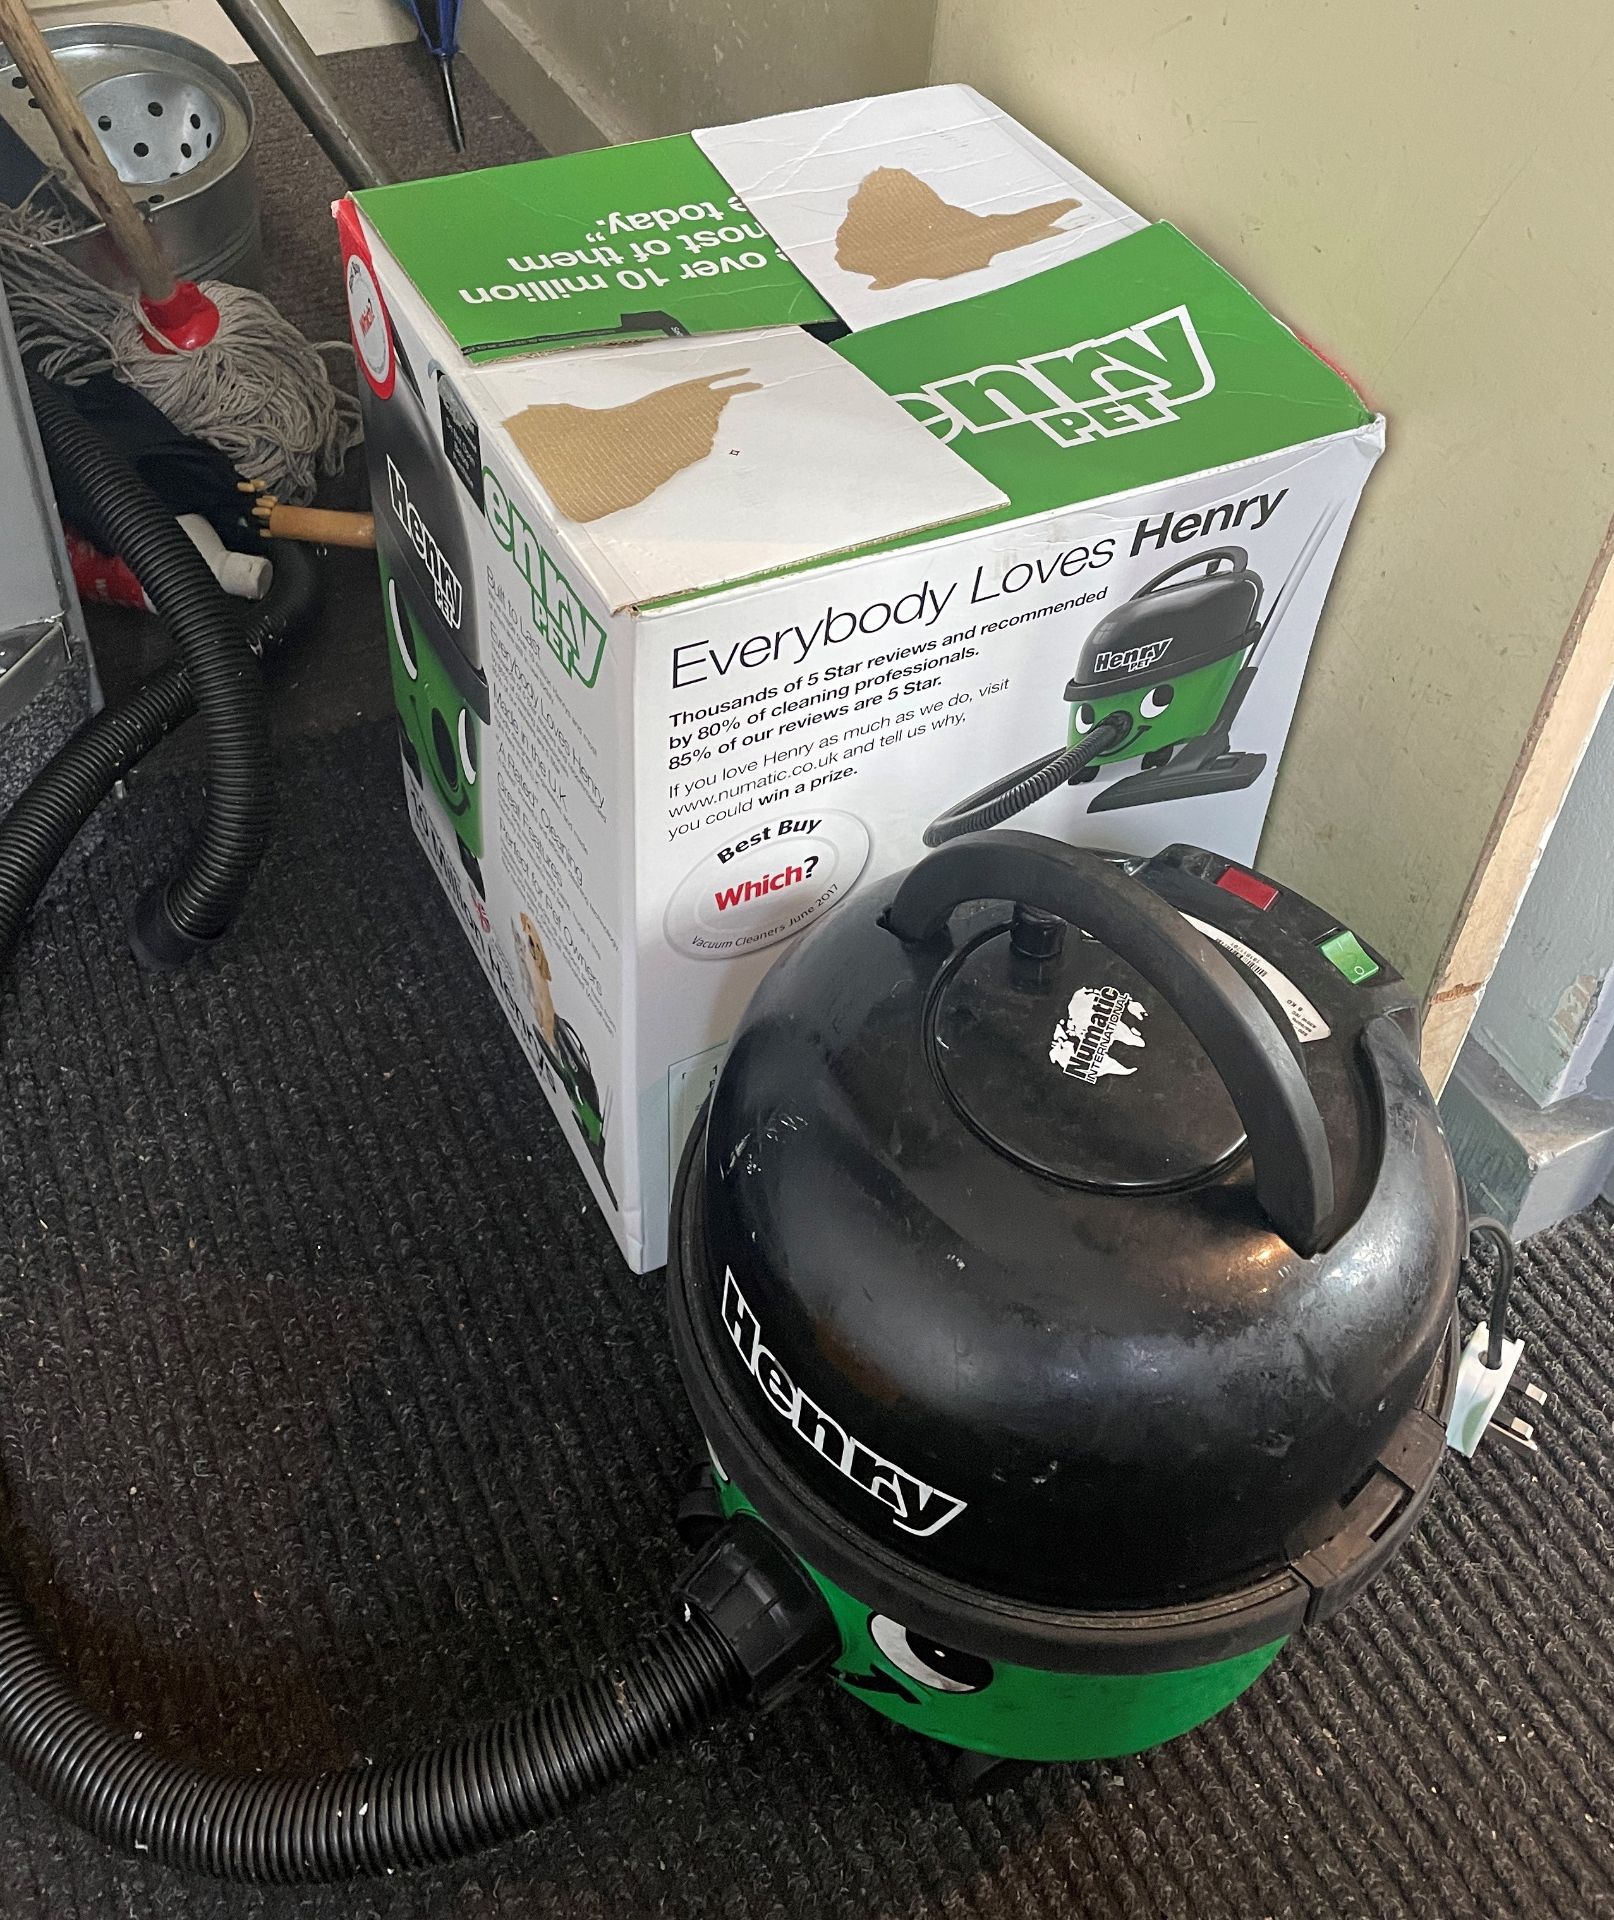 1 x Henry Hoover Pet Vacuum Cleaner With Original Box - Ref: HTYS - CL782 - Location: Leicester, - Image 5 of 5